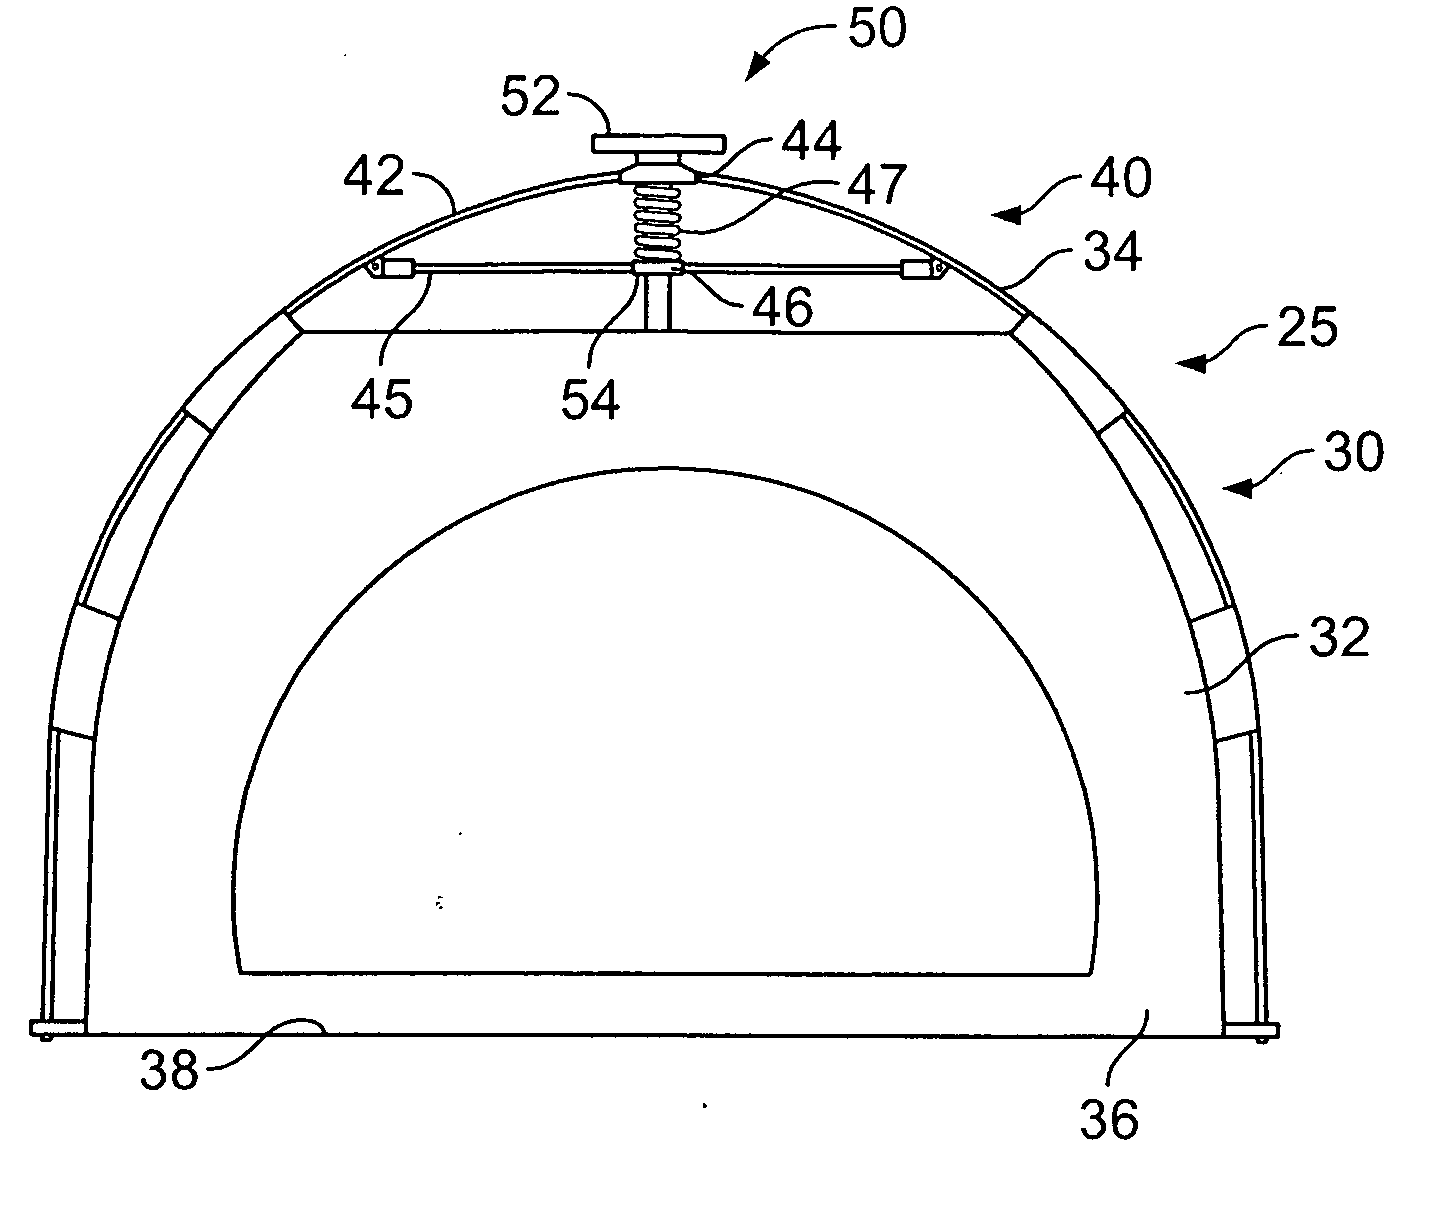 Apparatus and method for lighting a collapsible structure